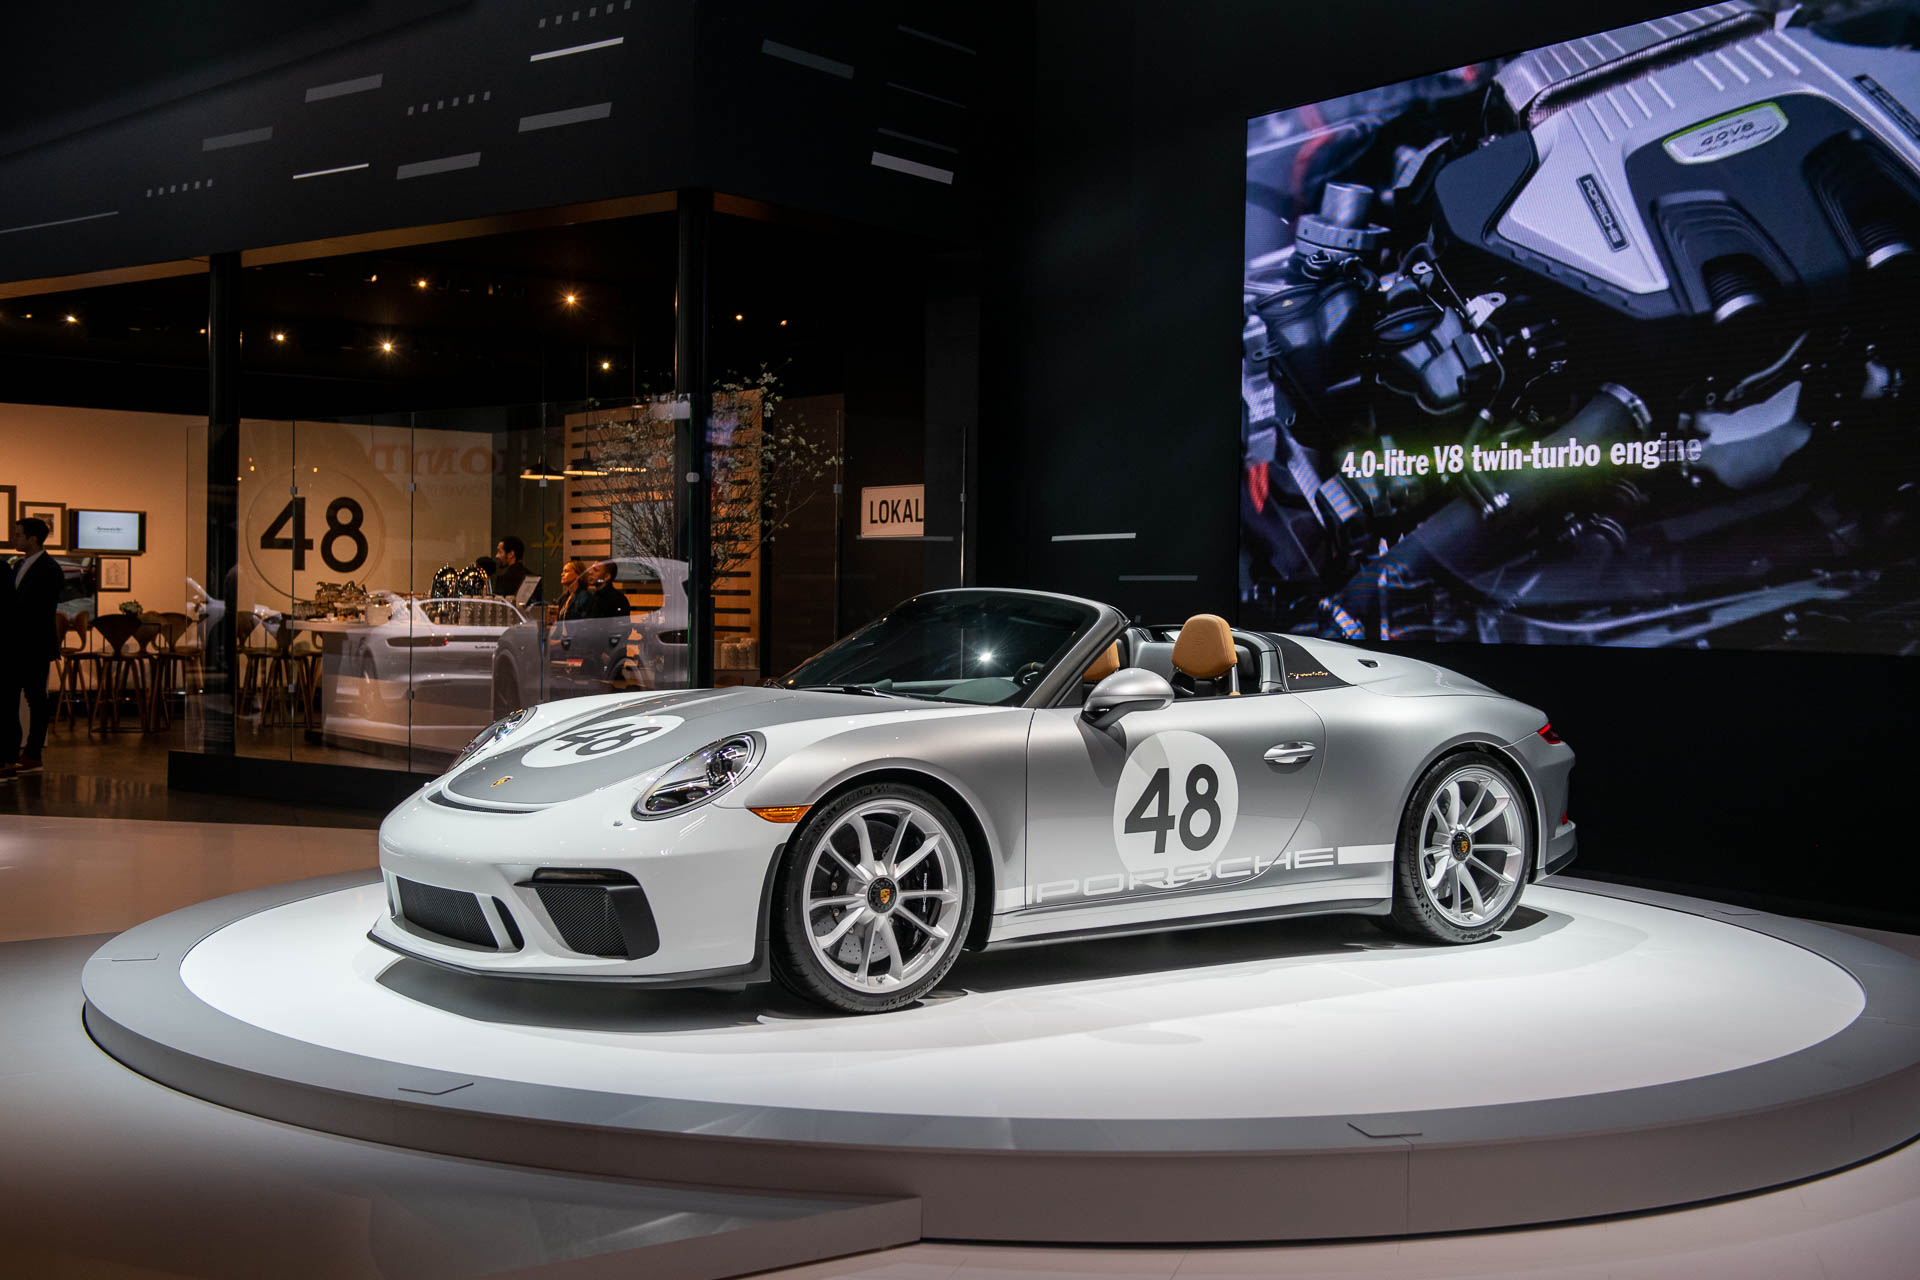 2019 New York International Auto Show in pictures The cars, SUVs, and